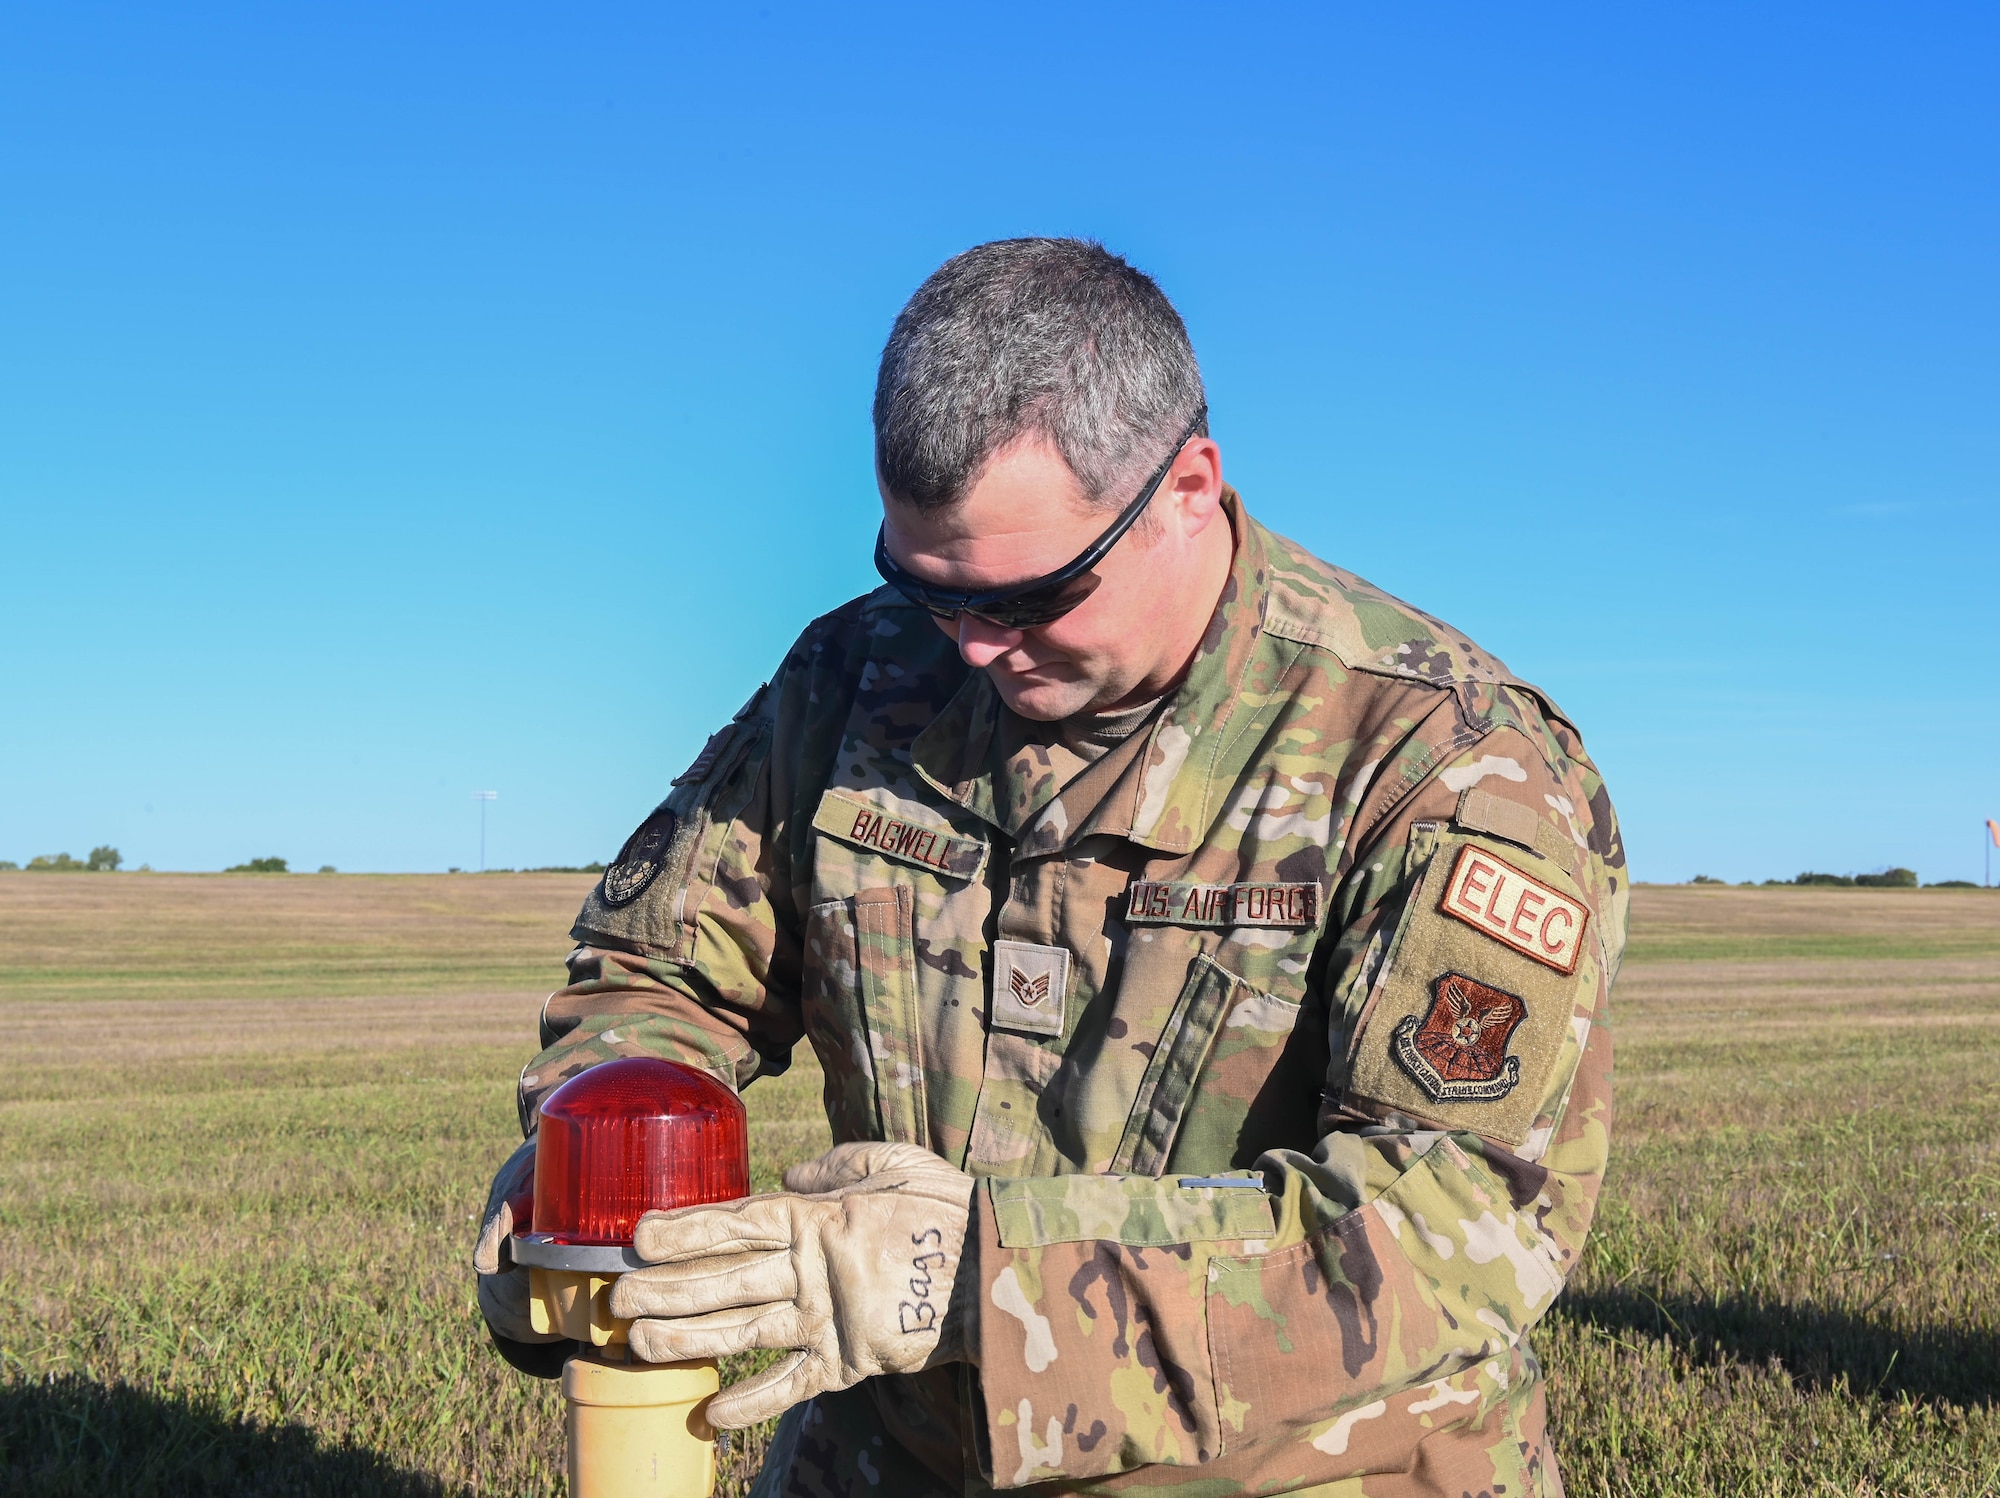 U.S. Air Force Staff Sgt. Kyle Bagwell, 509th Civil Engineering Squadron Electrical Systems Craftsman, completing the alignment of a temporary threshold light at Whiteman Air Force Base, September 26, 2022. (U.S. Air Force photo by Airman 1st Class Hailey Farrell)